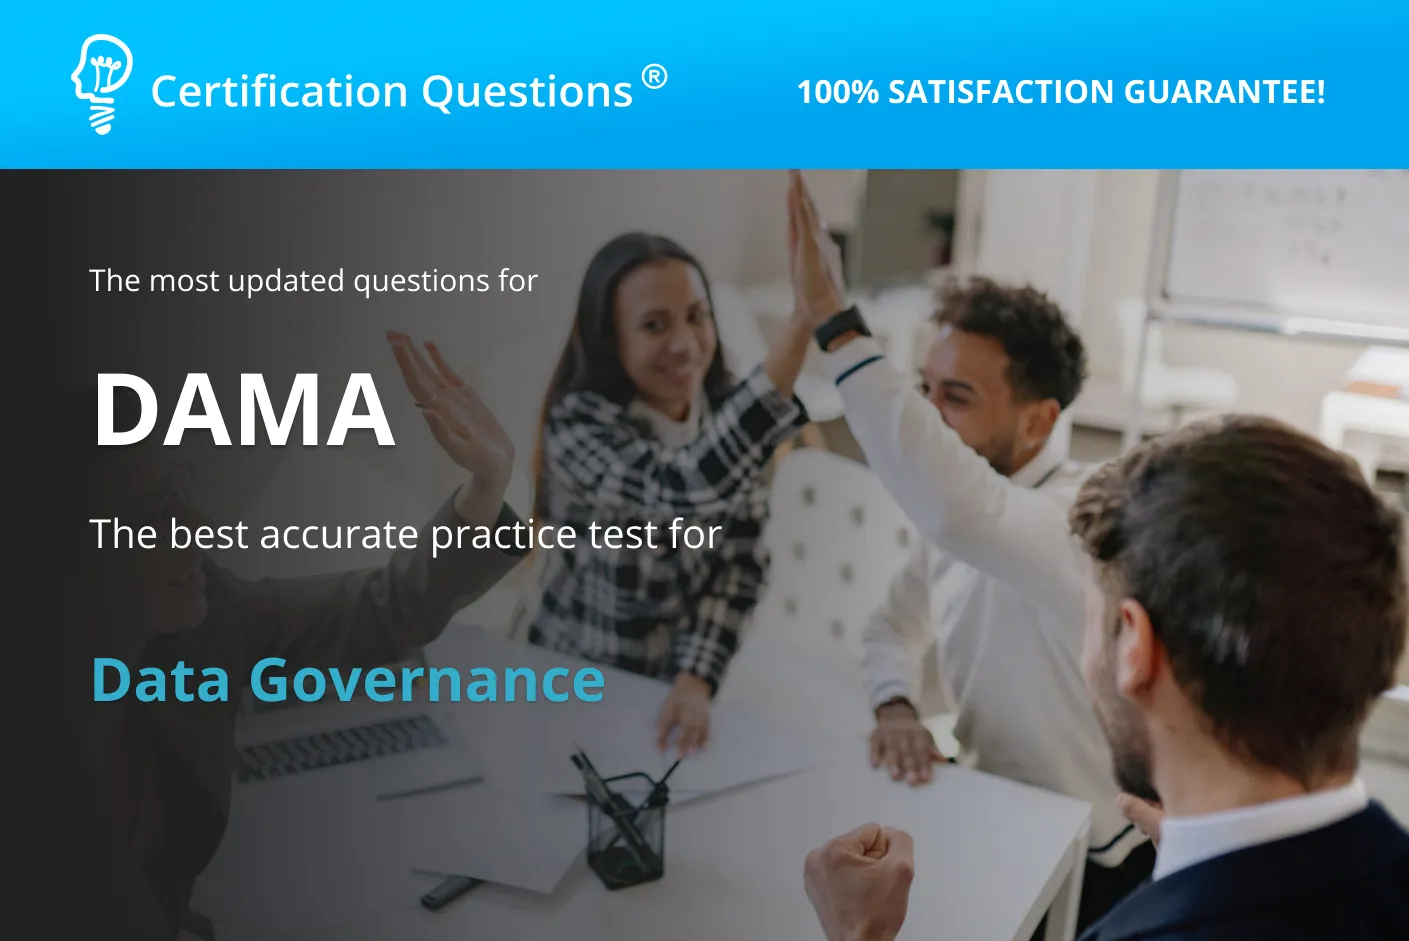 If you wish to get the data governance certification with ease, read this study guide